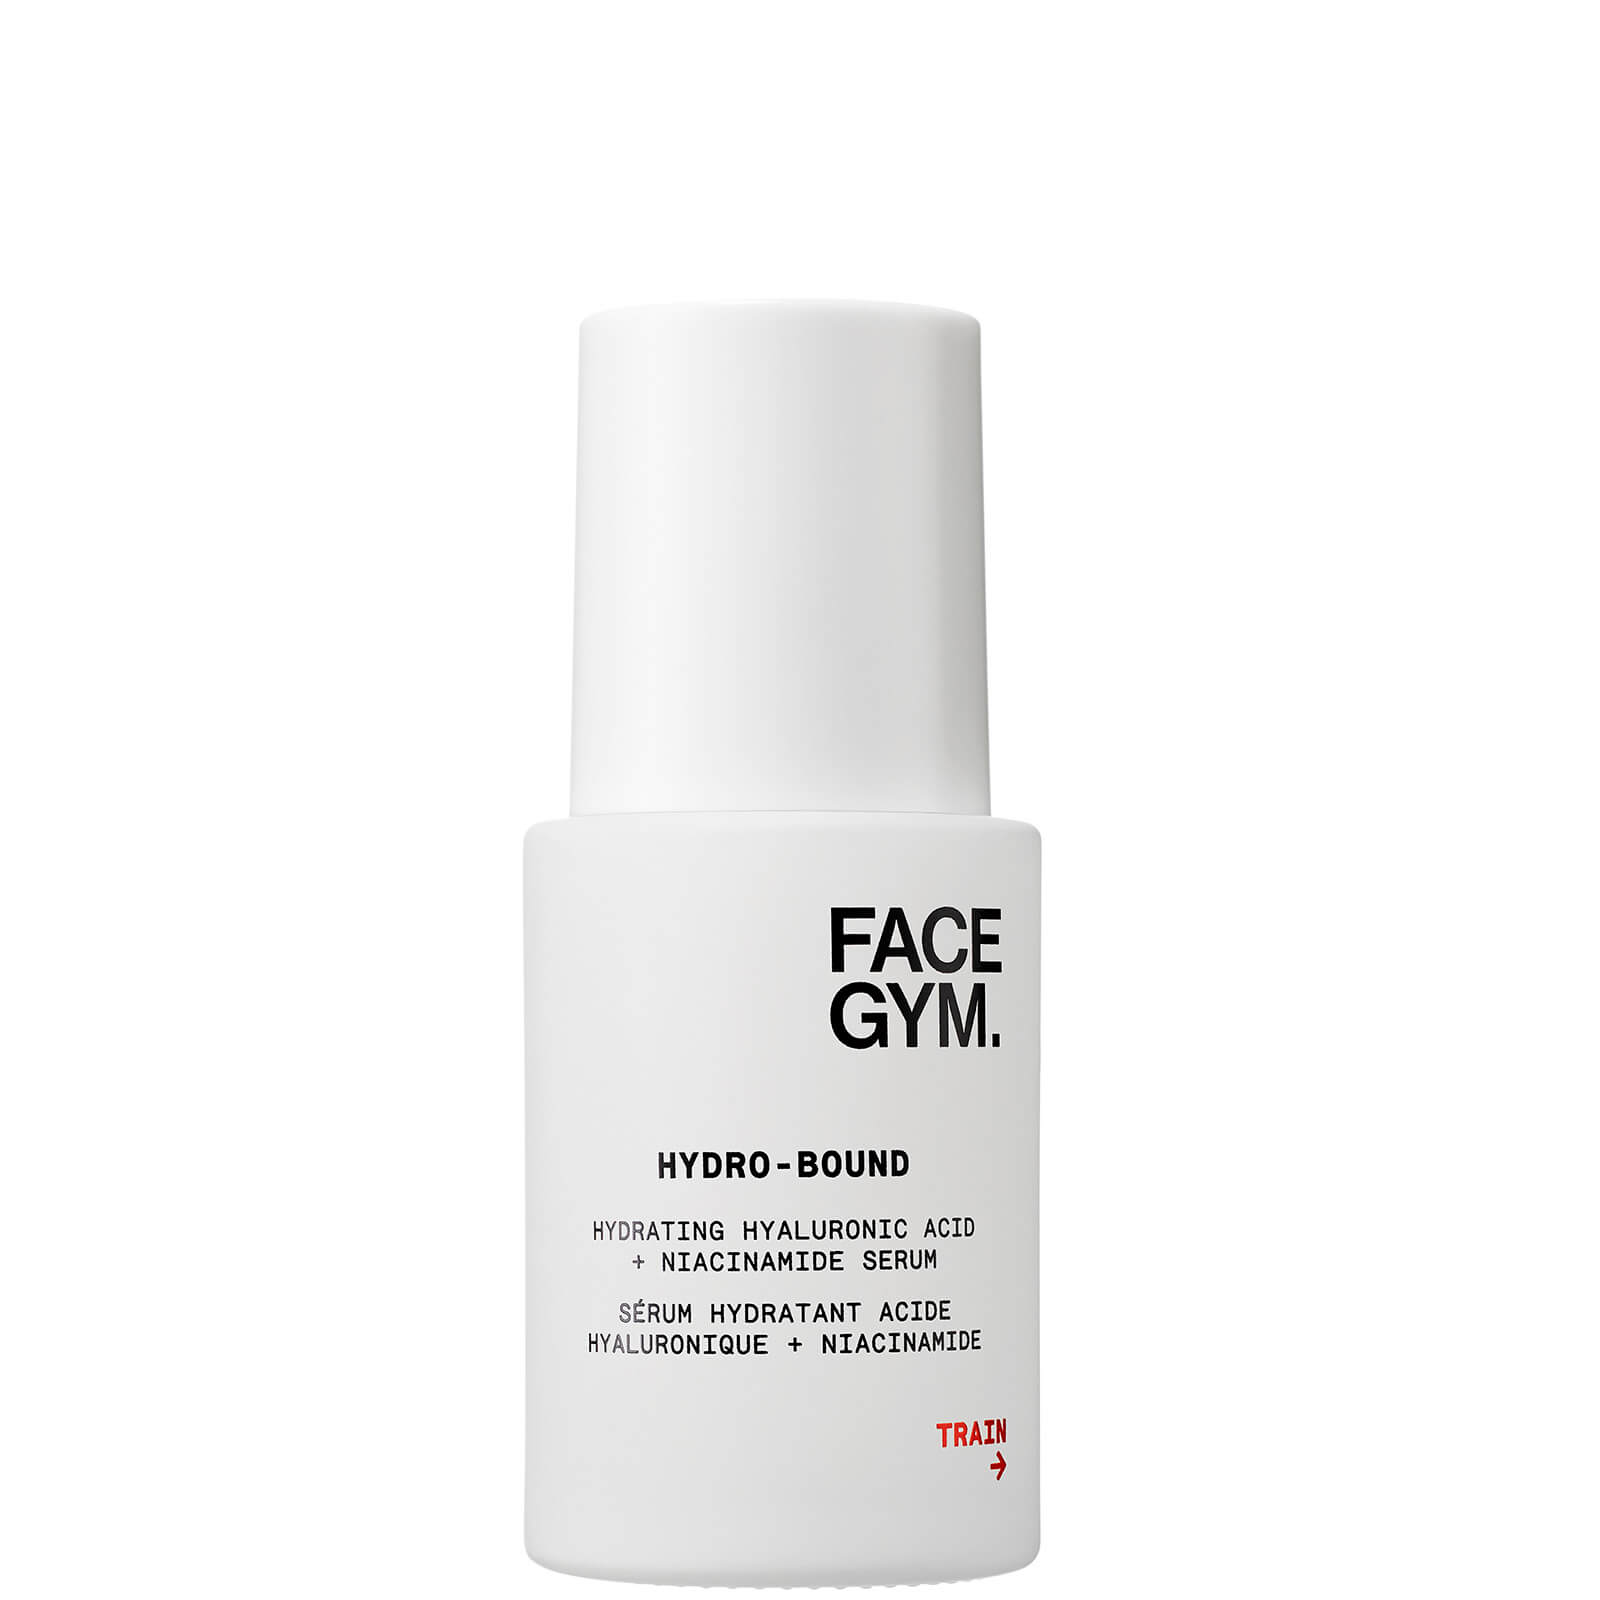 FaceGym Hydro-bound Hydrating Hyaluronic Acid and Niacinamide Serum (Various Sizes) - 30ml